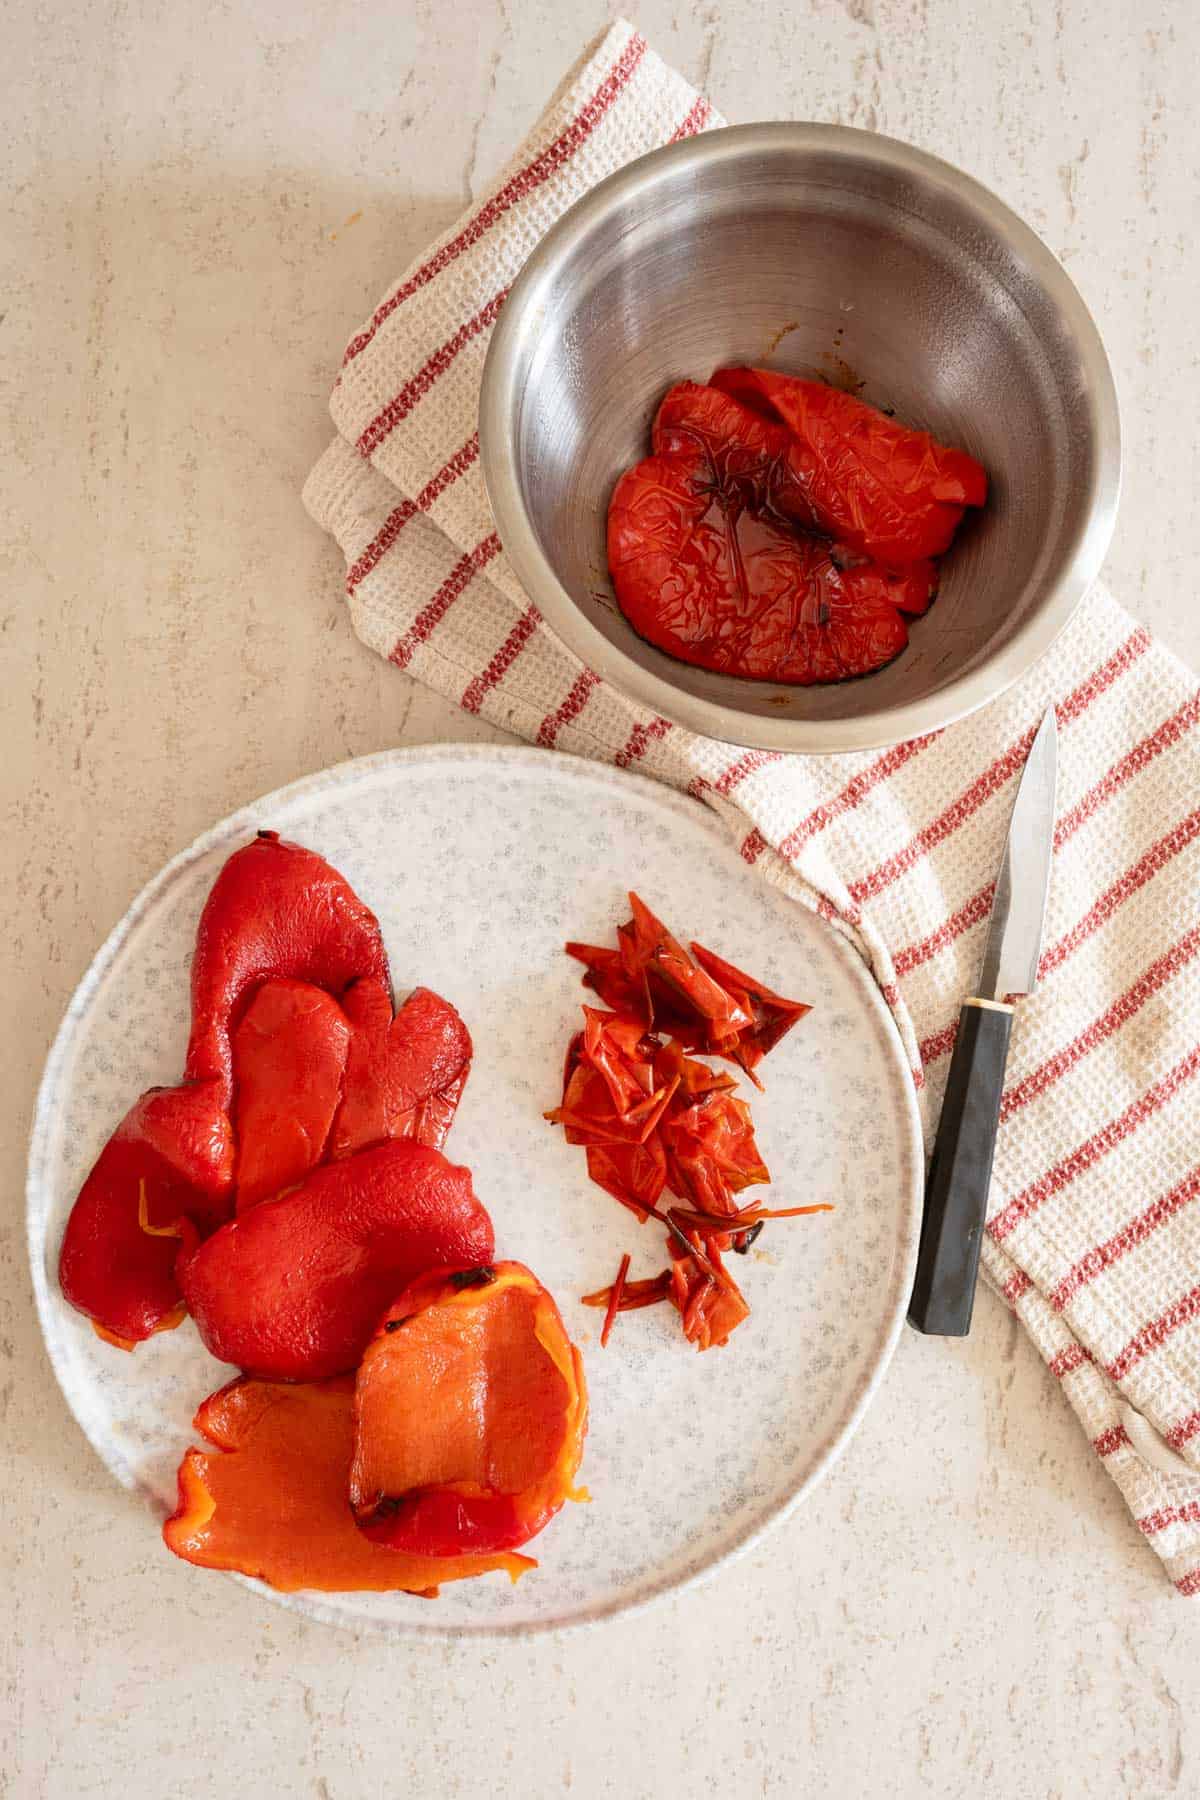 Roasted red peppers on a plate with thier skins to the side and a bowl of additional peppers on a kitchen counter.